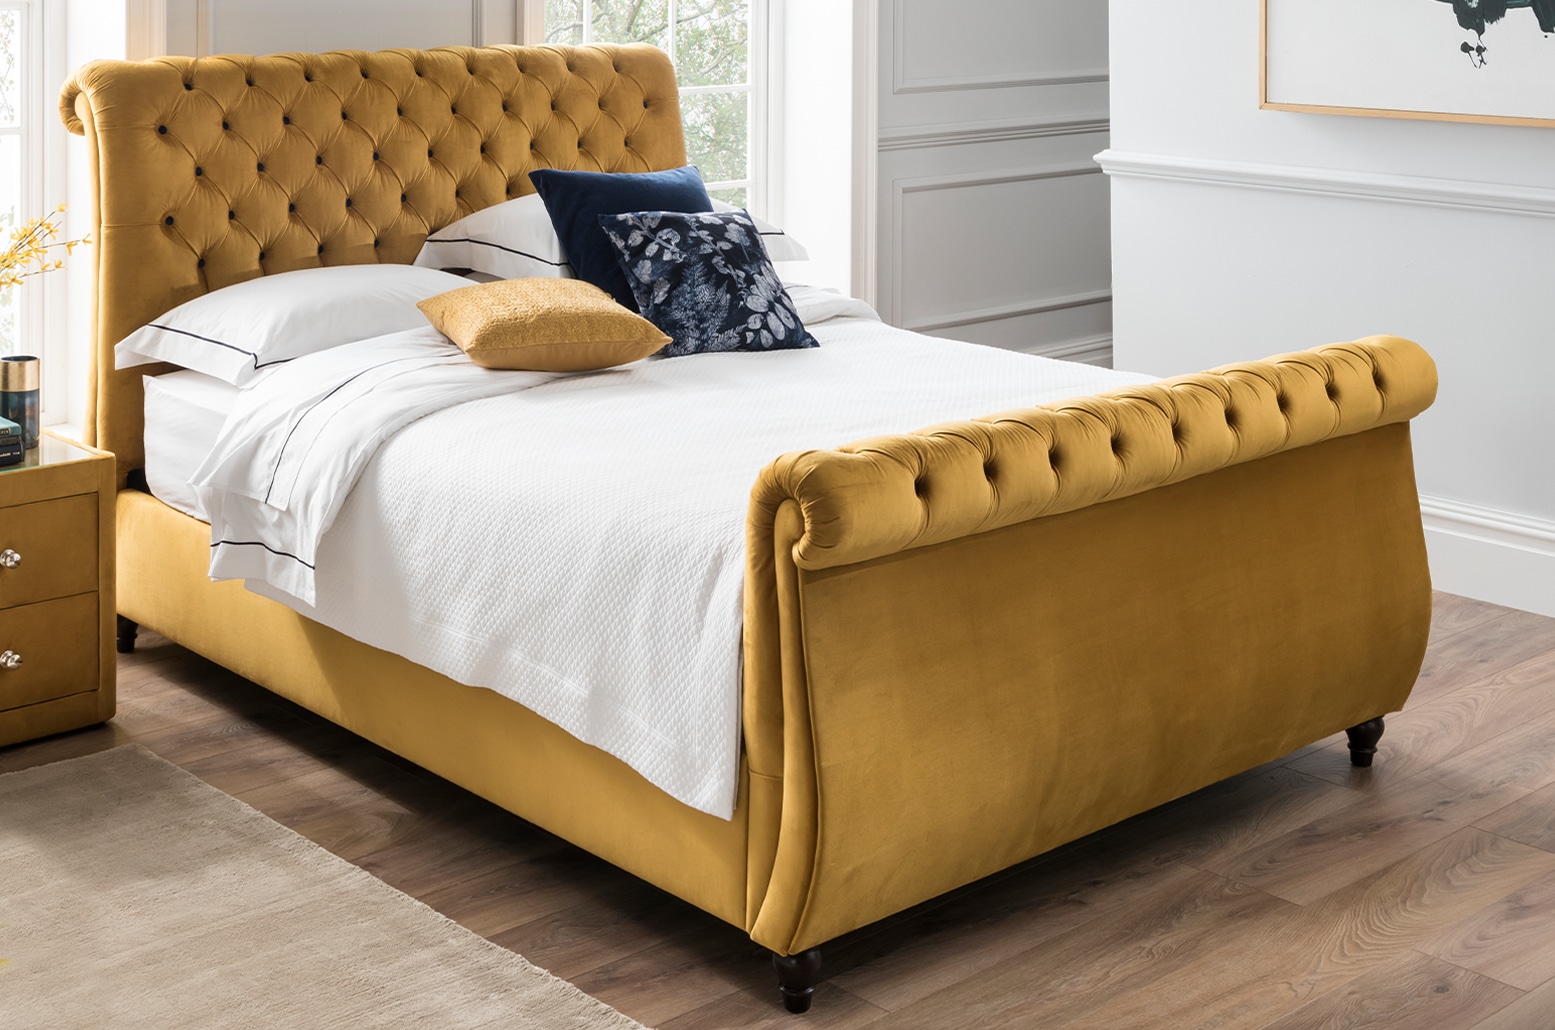 Chesterfild bedroom design at Hush Bedrooms - yellow